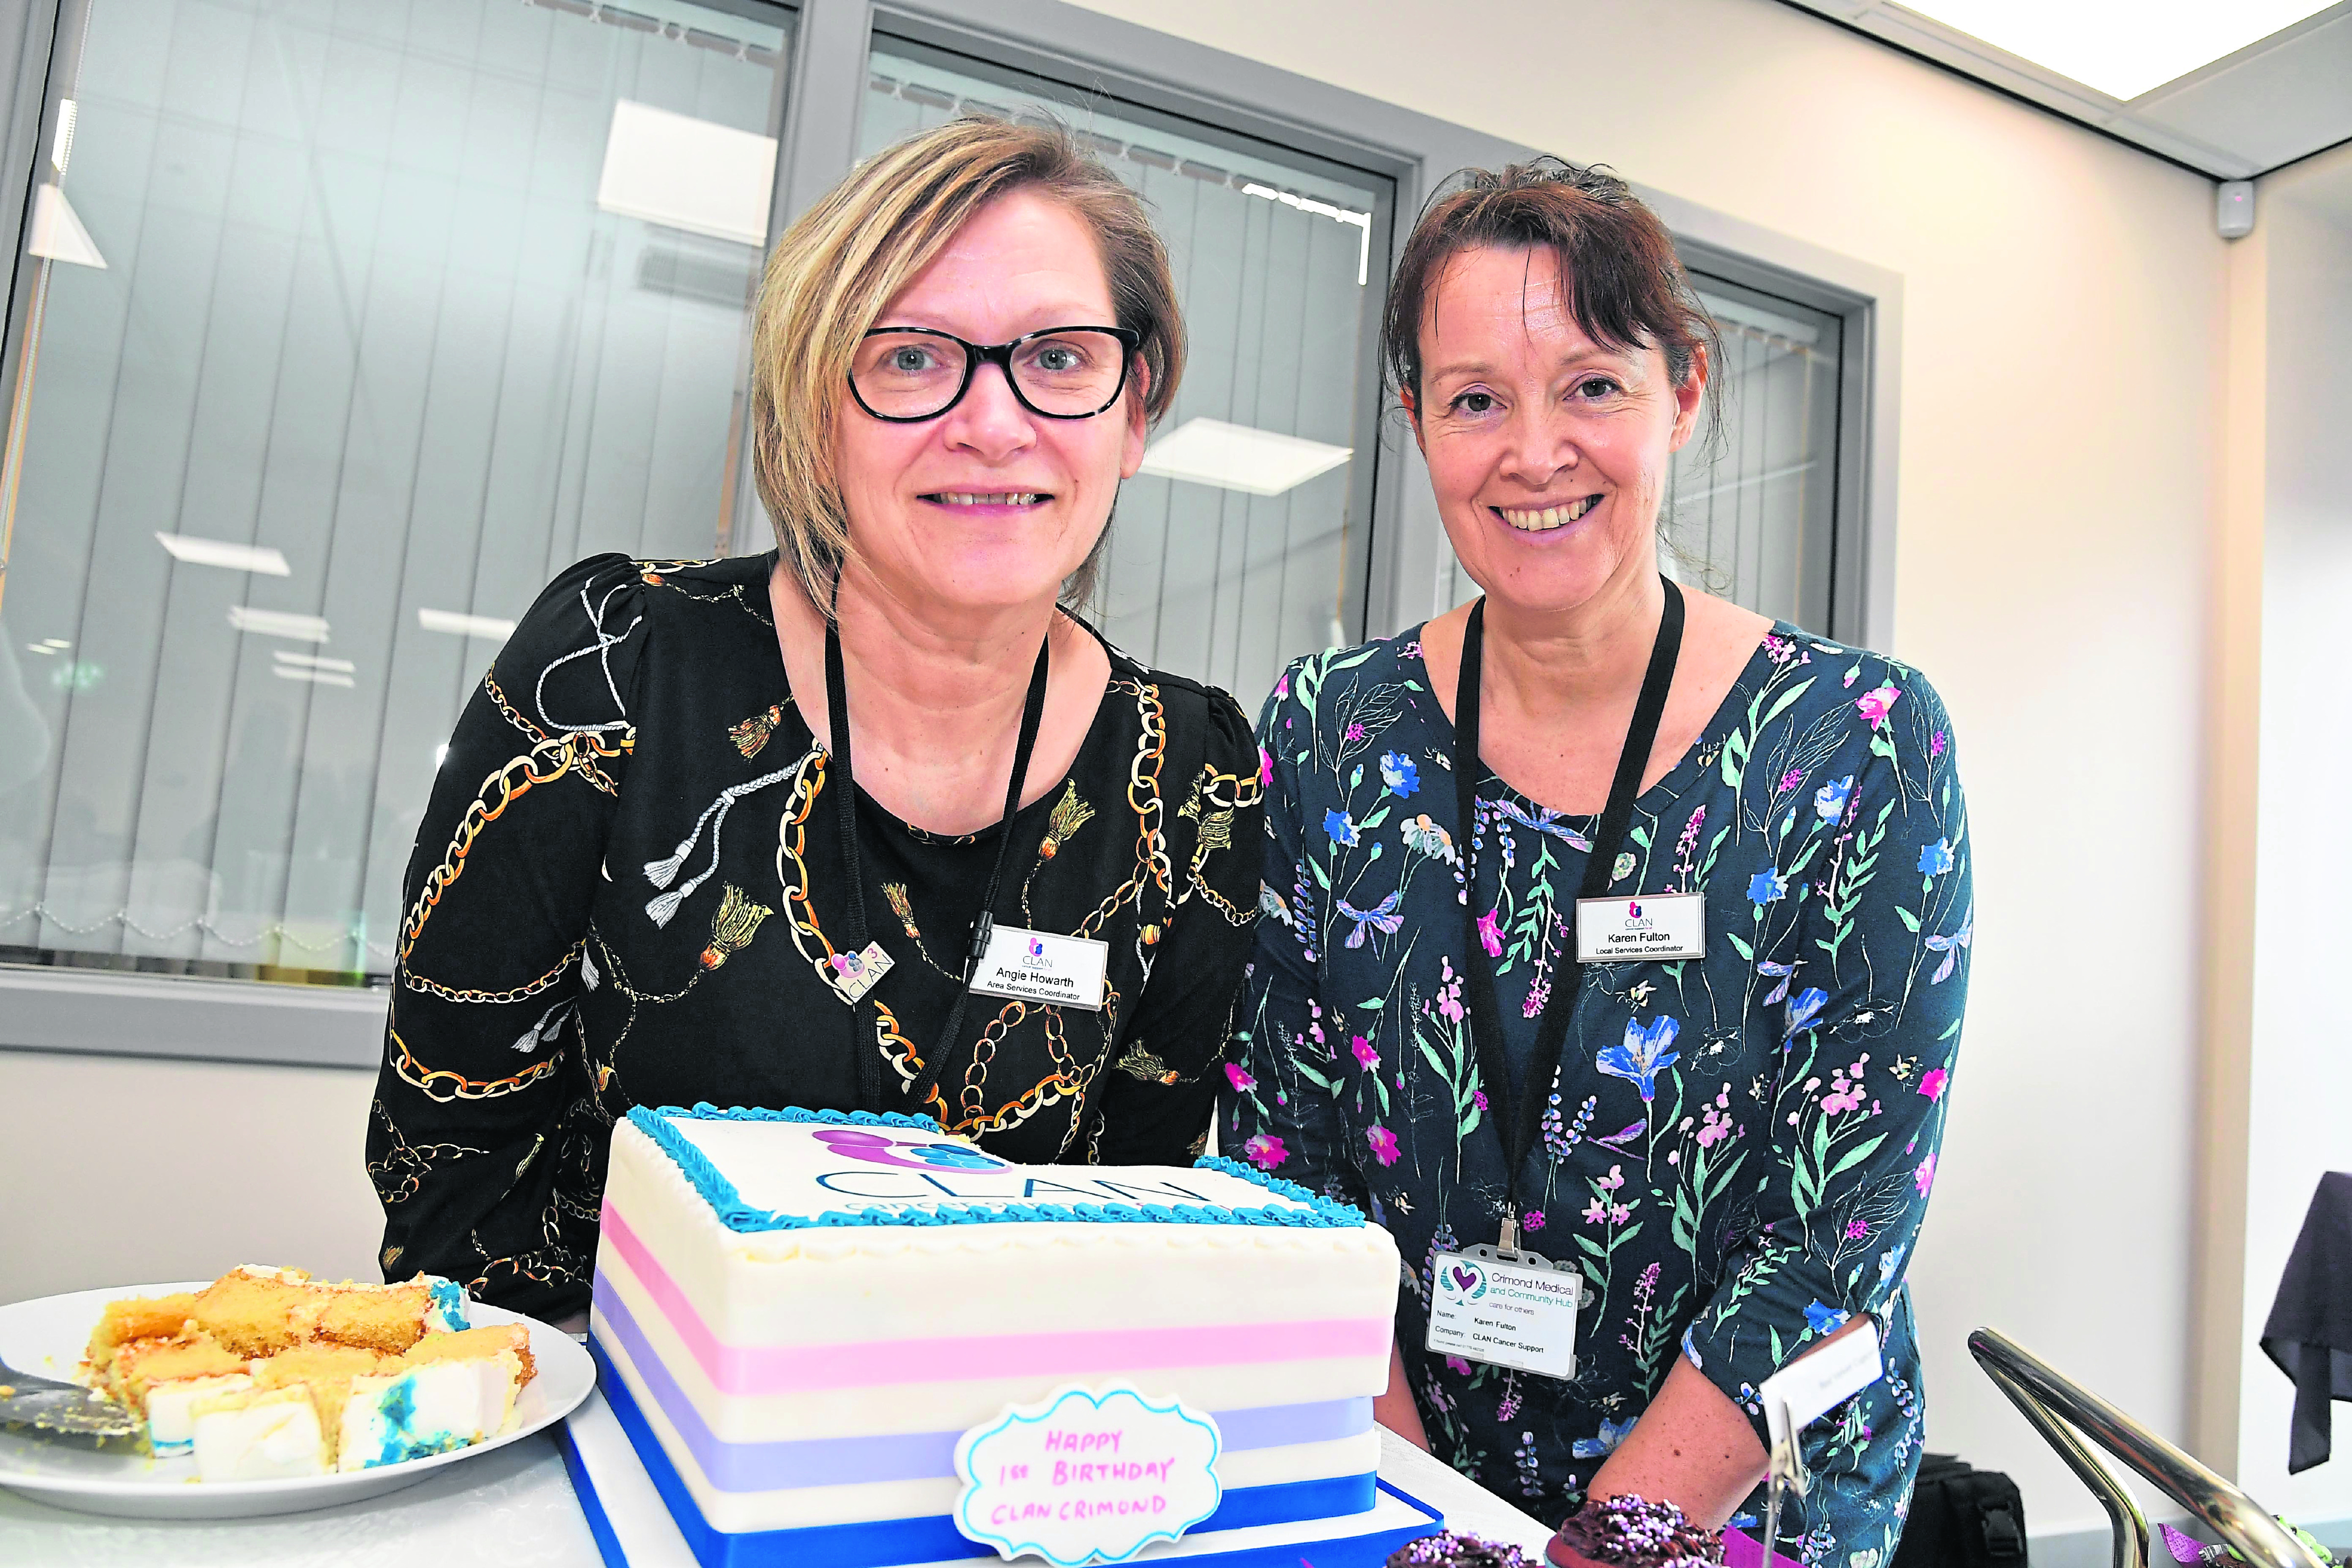 Angie Howarth (left), area support services co-ordinator, and Karen Fulton, local support co-ordinator.